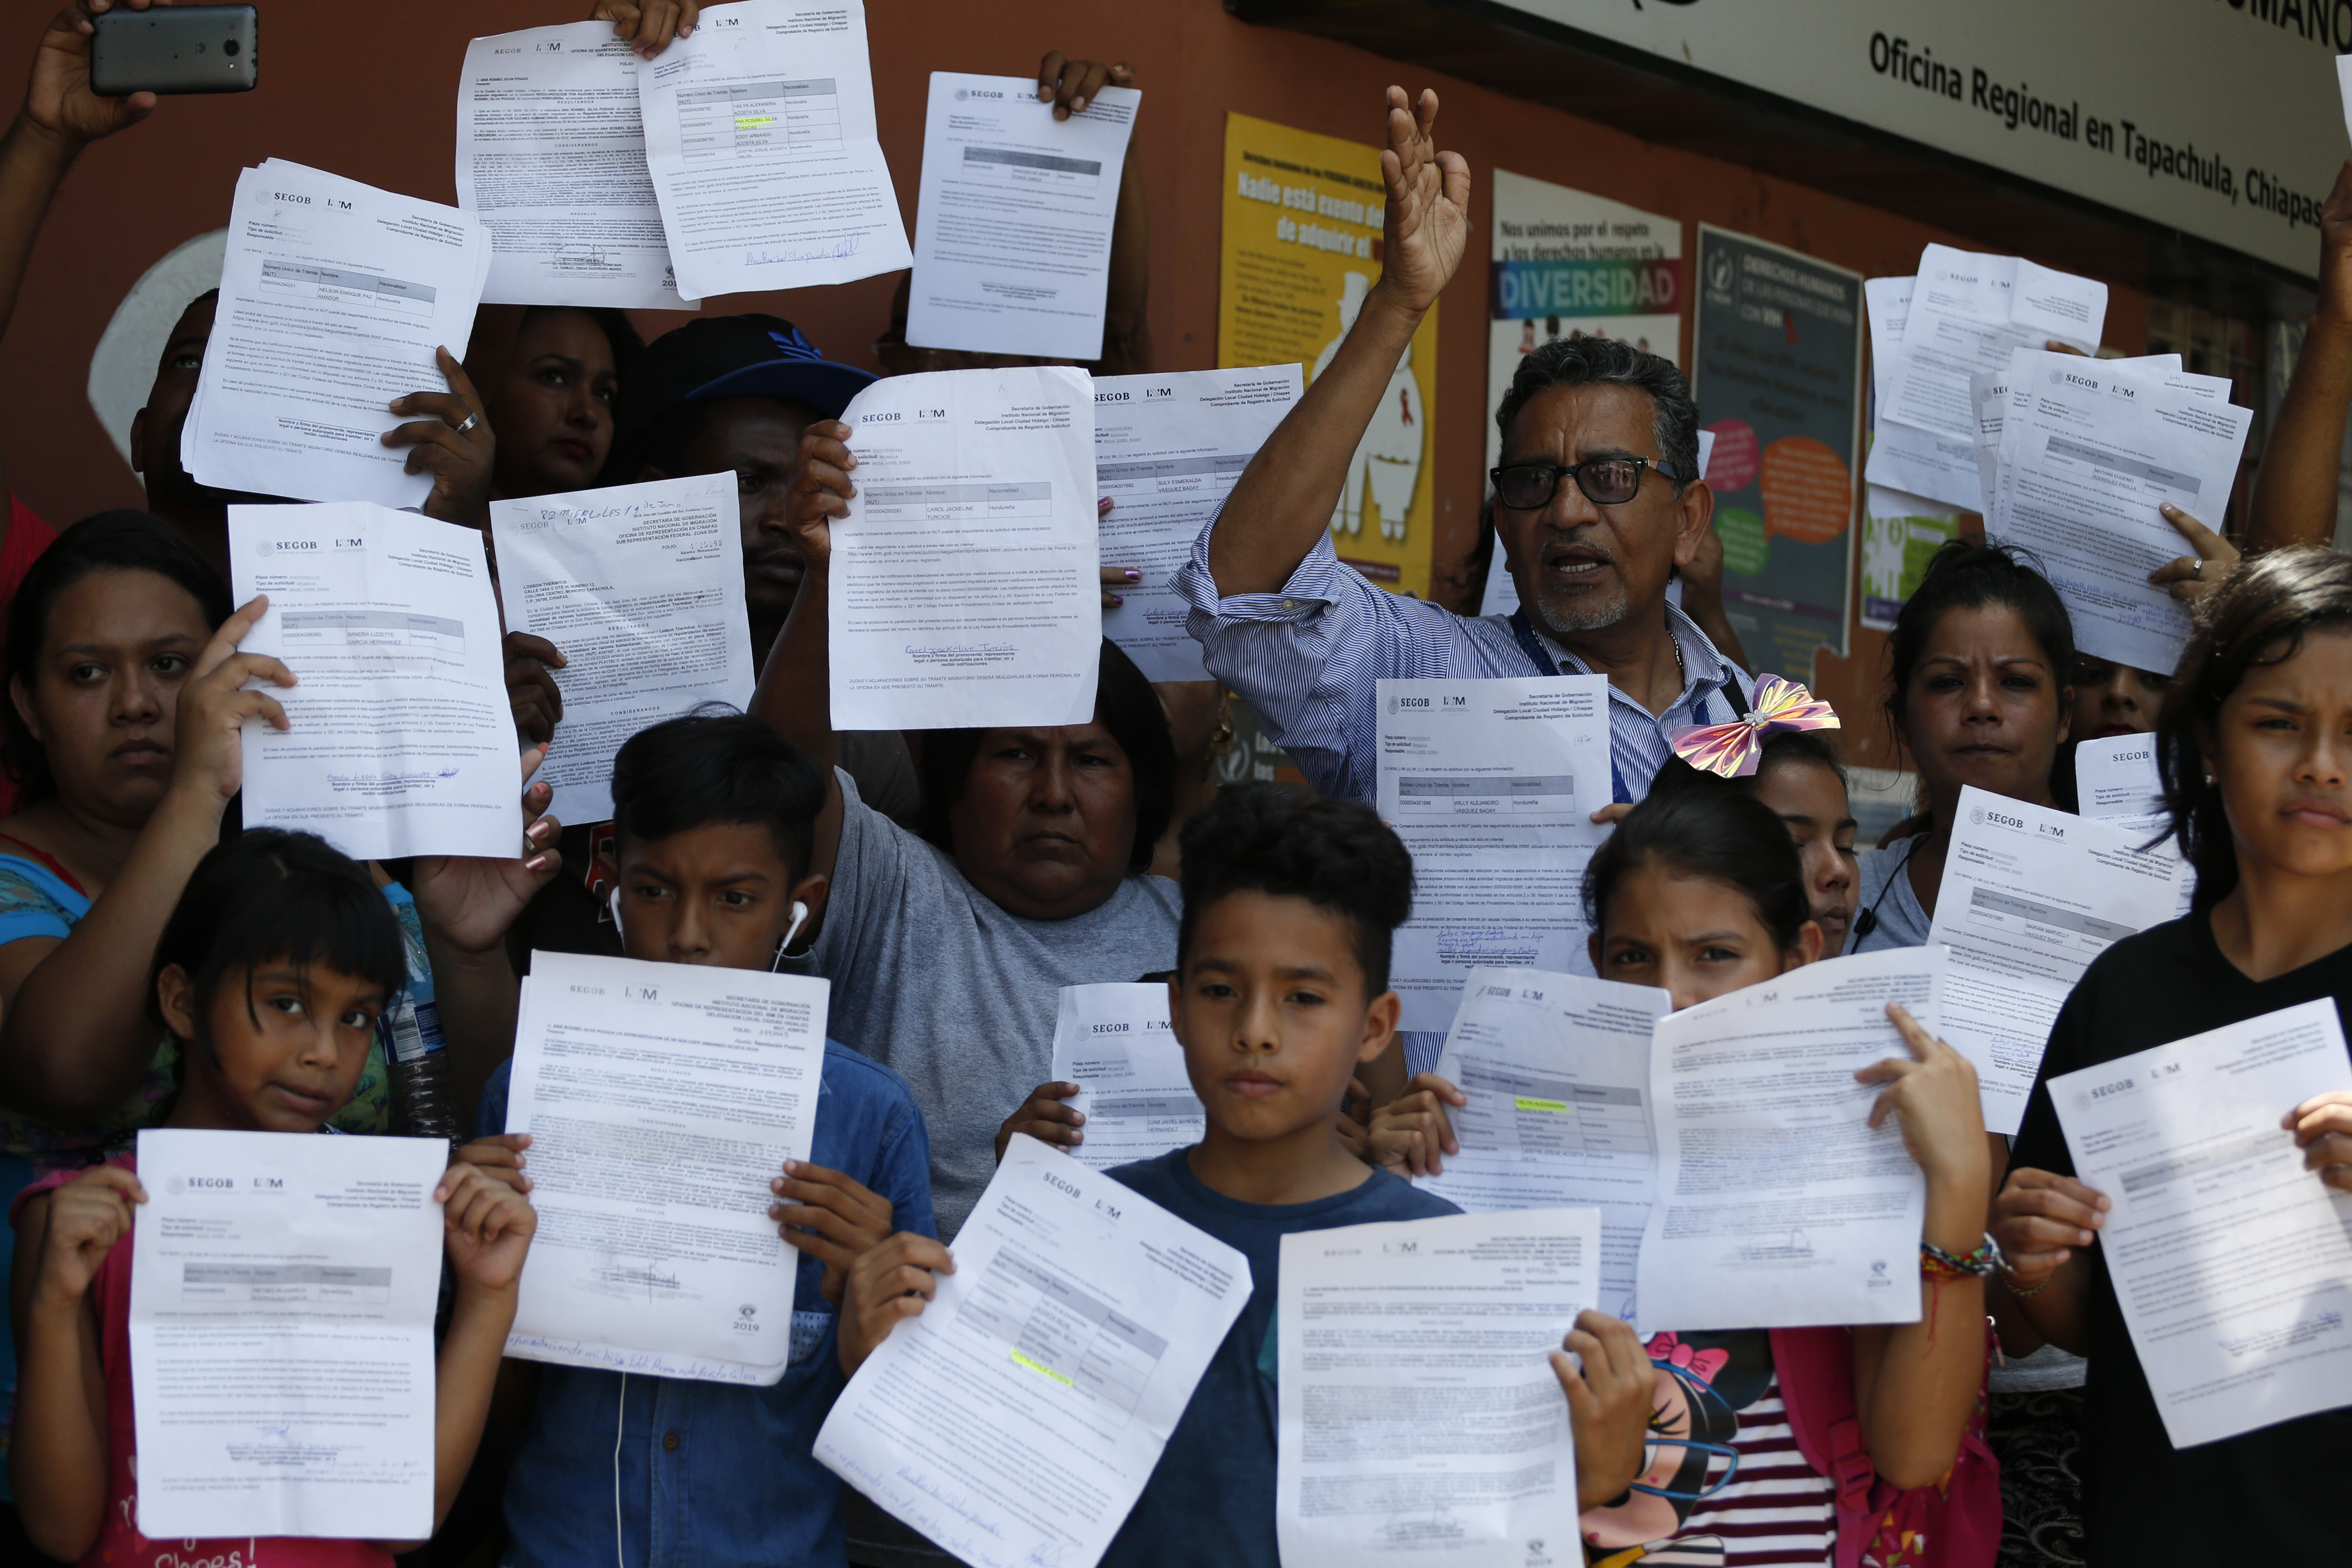 Human rights activist Luis Villagran speaks as migrants hold up their Mexican migration paperwork during a small protest against long wait times for receiving documents to legally stay in Mexico, outside the office of the national Human Rights Commission in Tapachula, Mexico, Wednesday, June 19, 2019. Villagran led a group of several dozens migrants to the offices to protest in front of the press, before entering with a representative group of migrants from several countries to present the group's complaints.(AP Photo/Rebecca Blackwell)